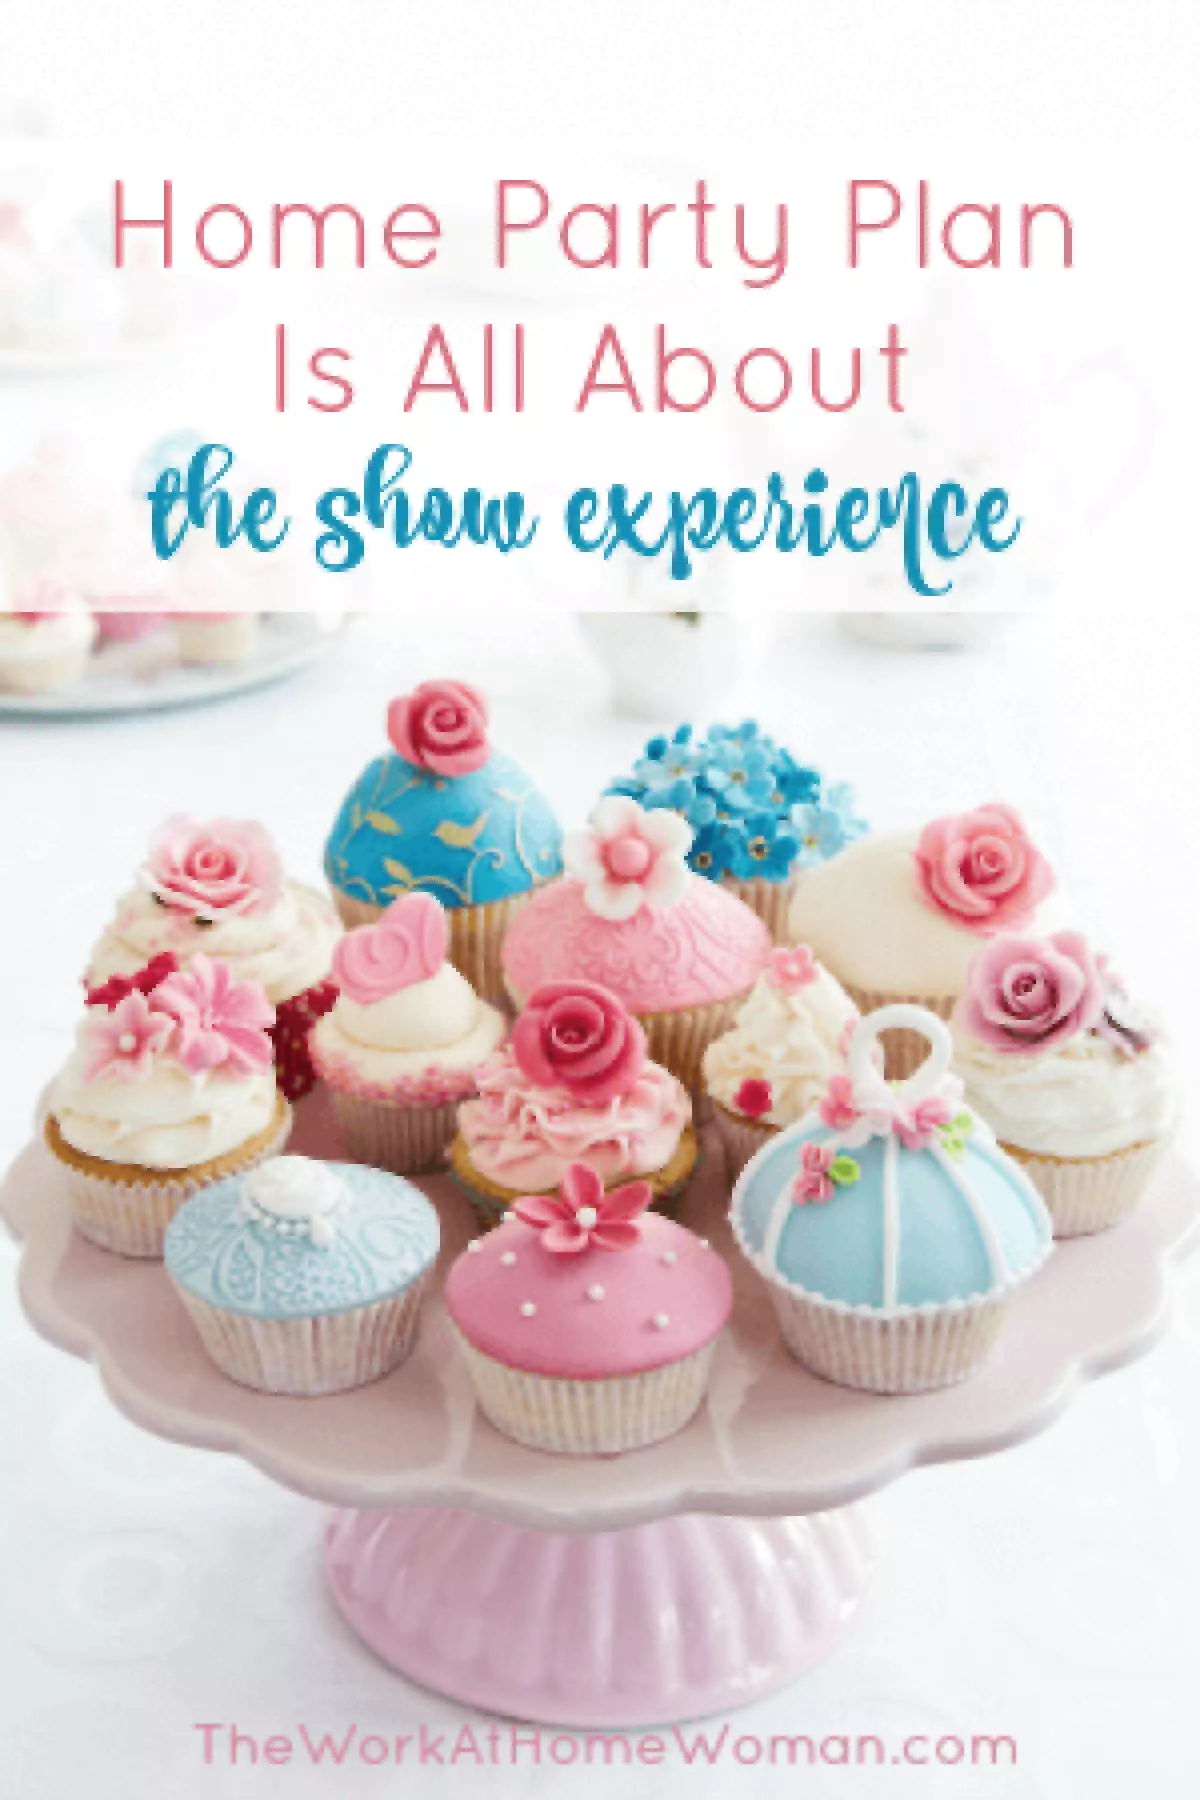 Some say the party plan model is dying, but really, home shopping parties are all about the experience! Here's how to create a successful home party show.